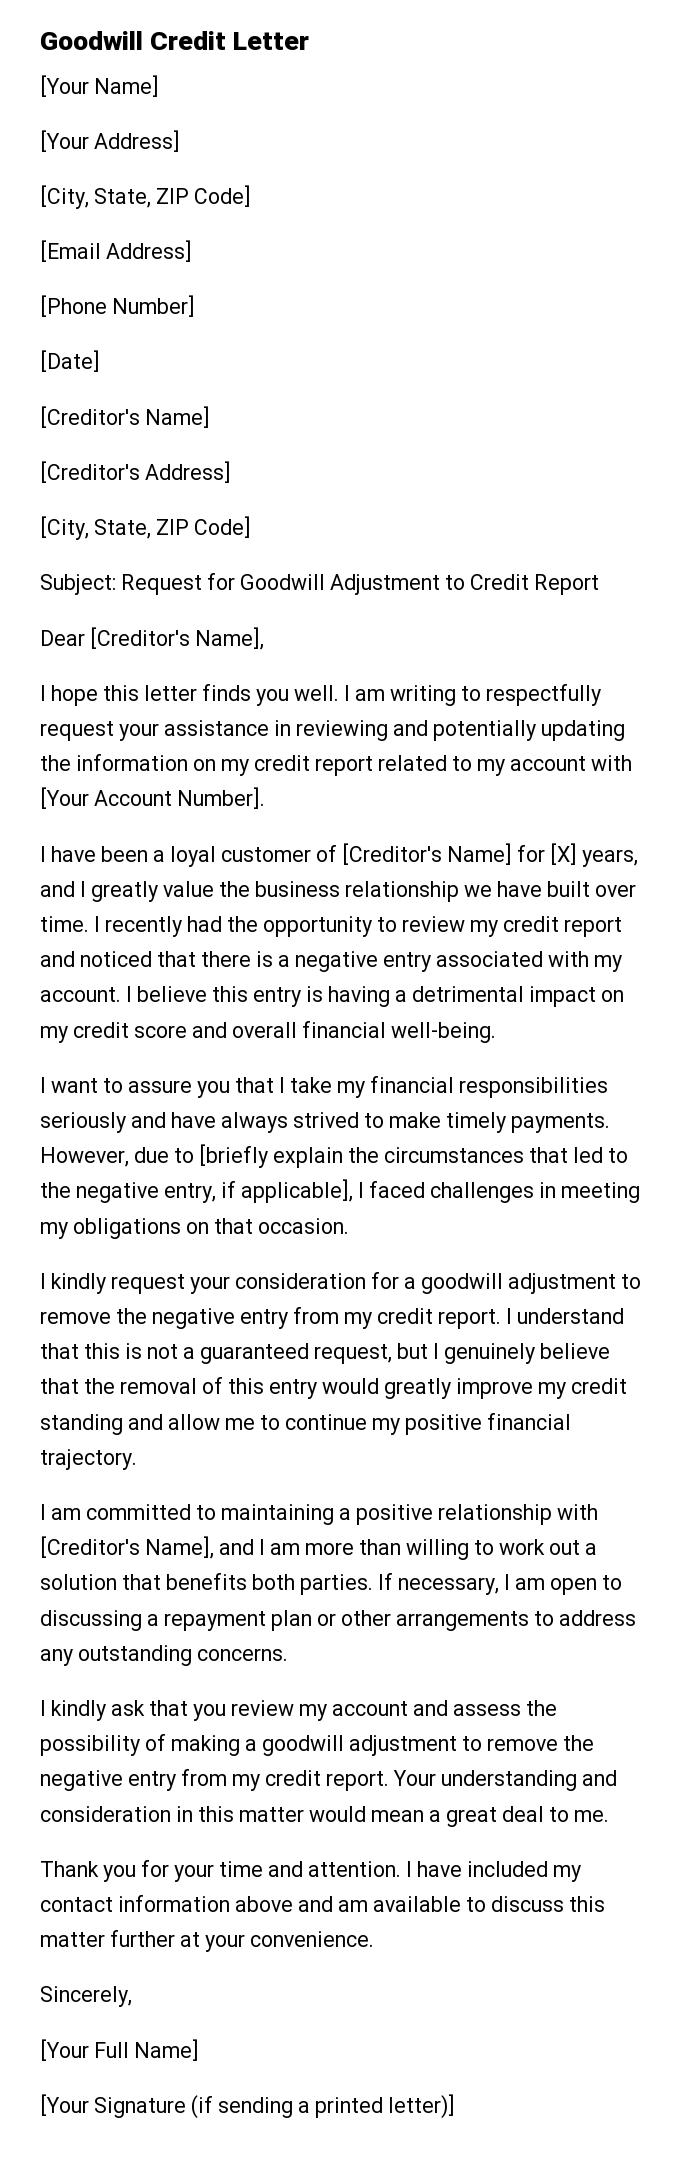 Goodwill Credit Letter